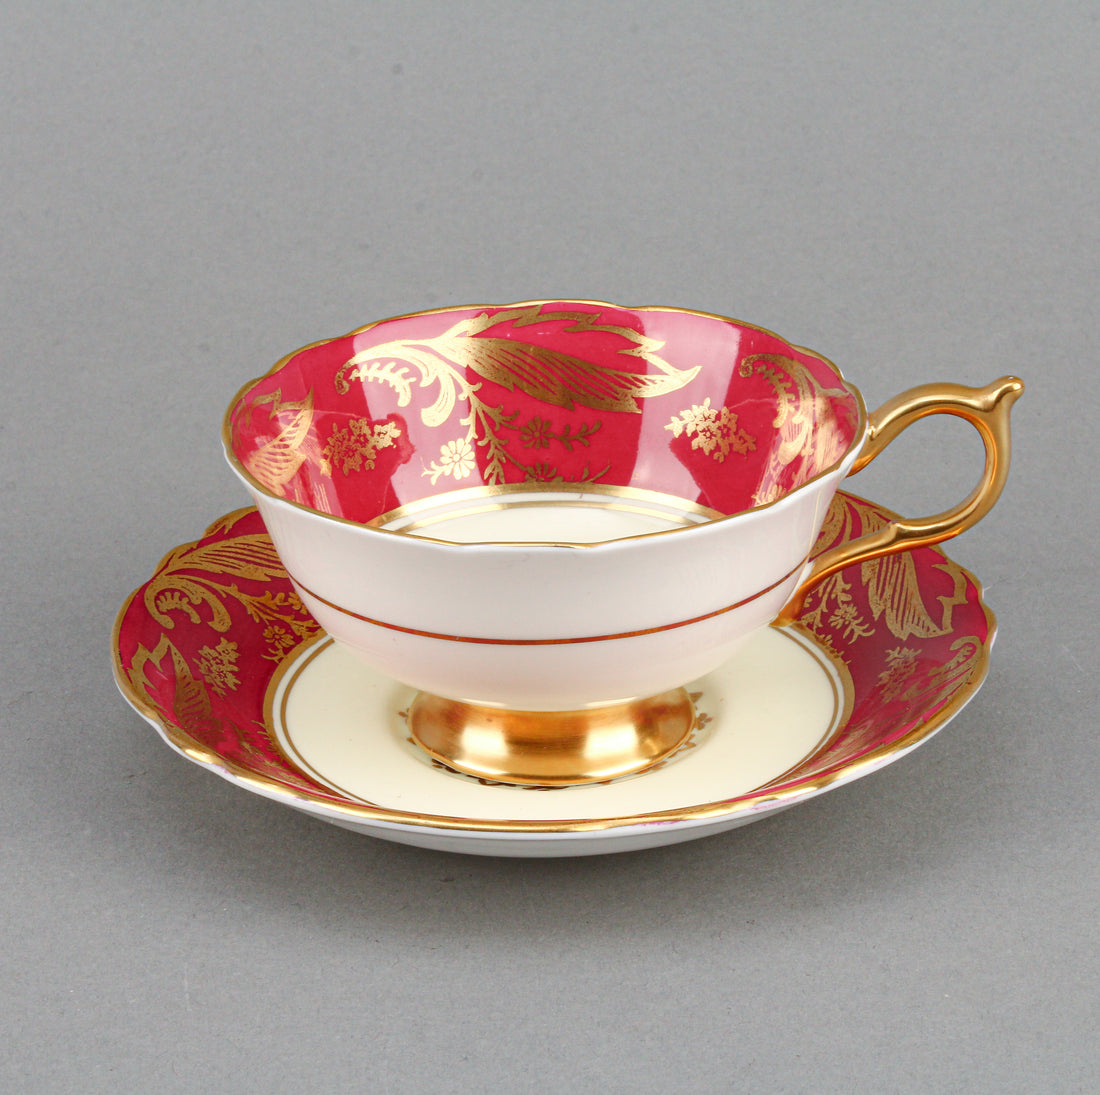 PARAGON A479 Red Band Cup & Saucer